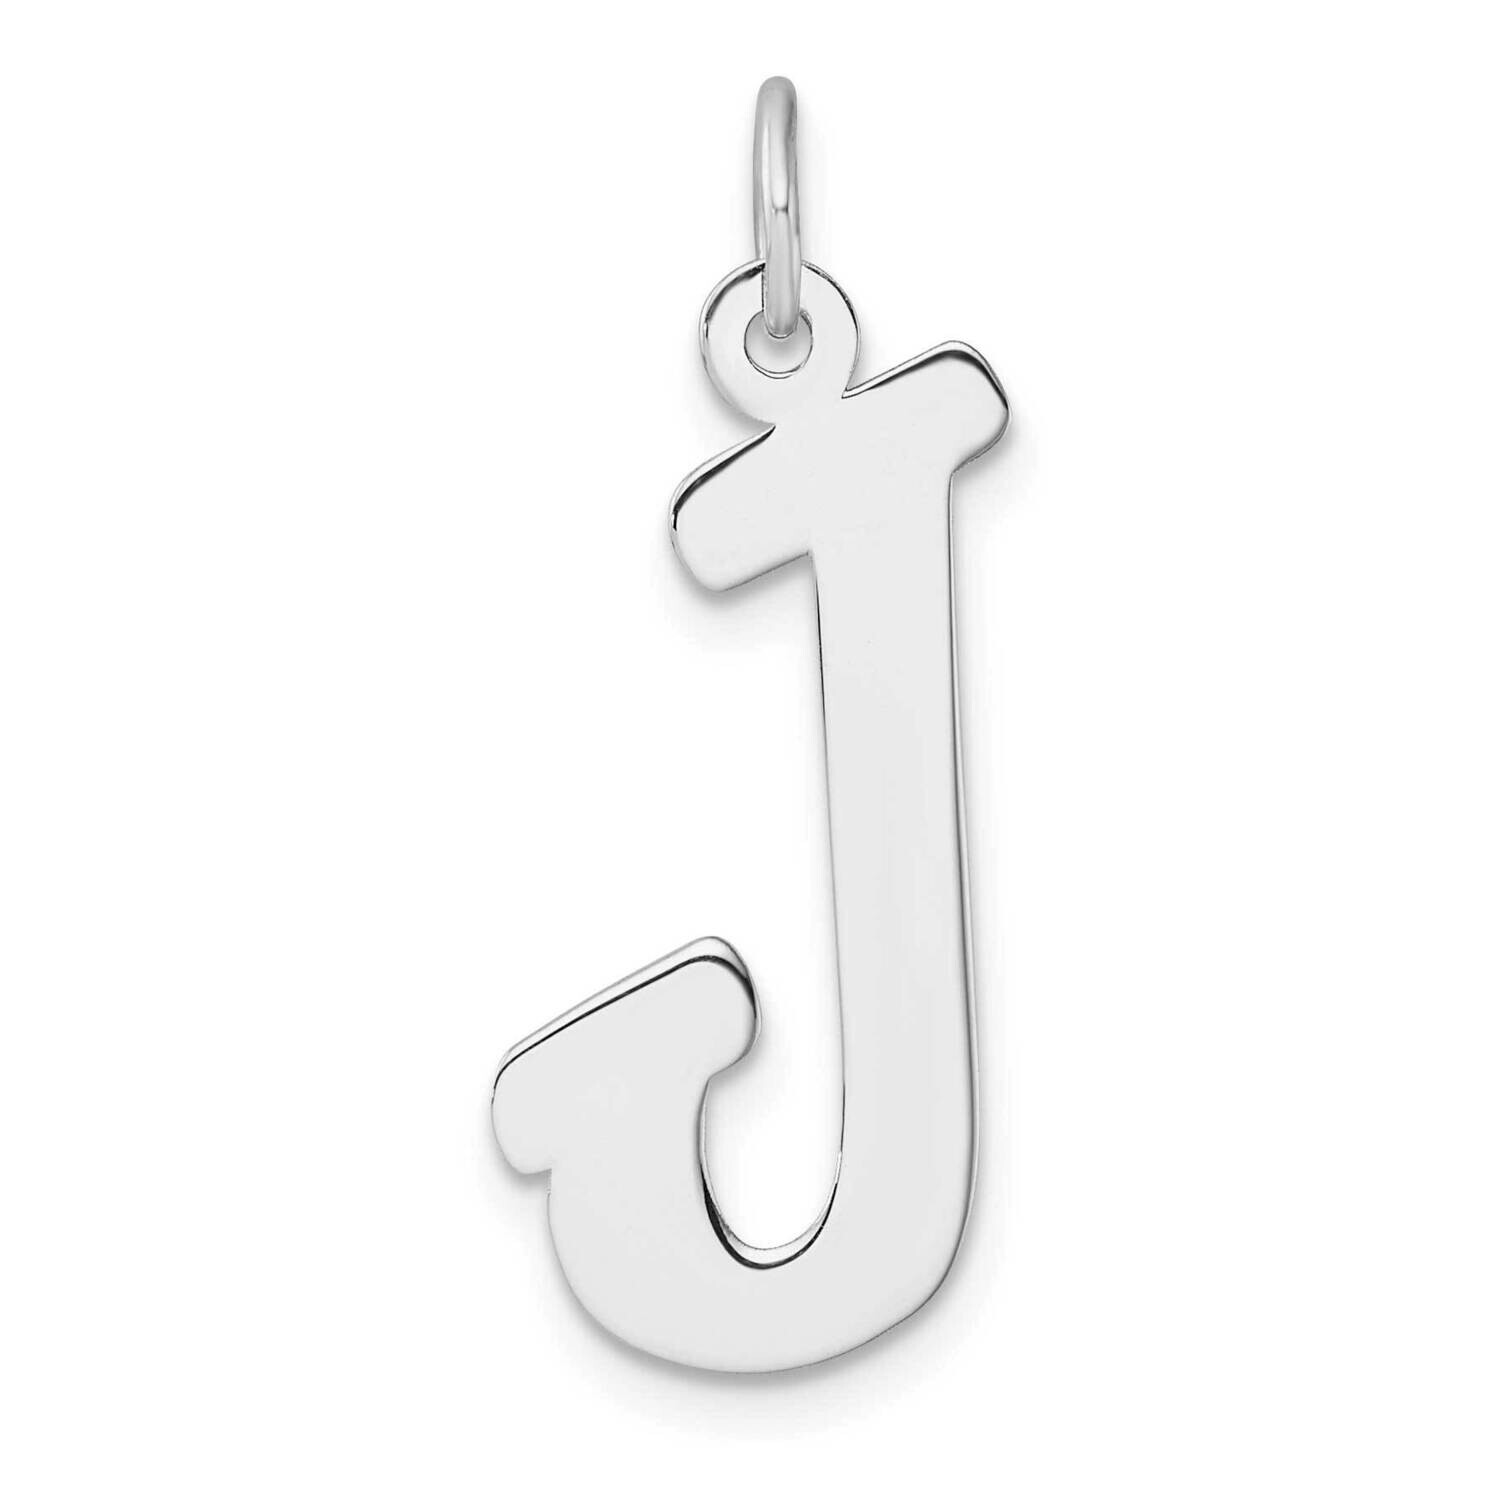 Large Script Letter J Initial Charm Sterling Silver Rhodium-Plated QC11253J